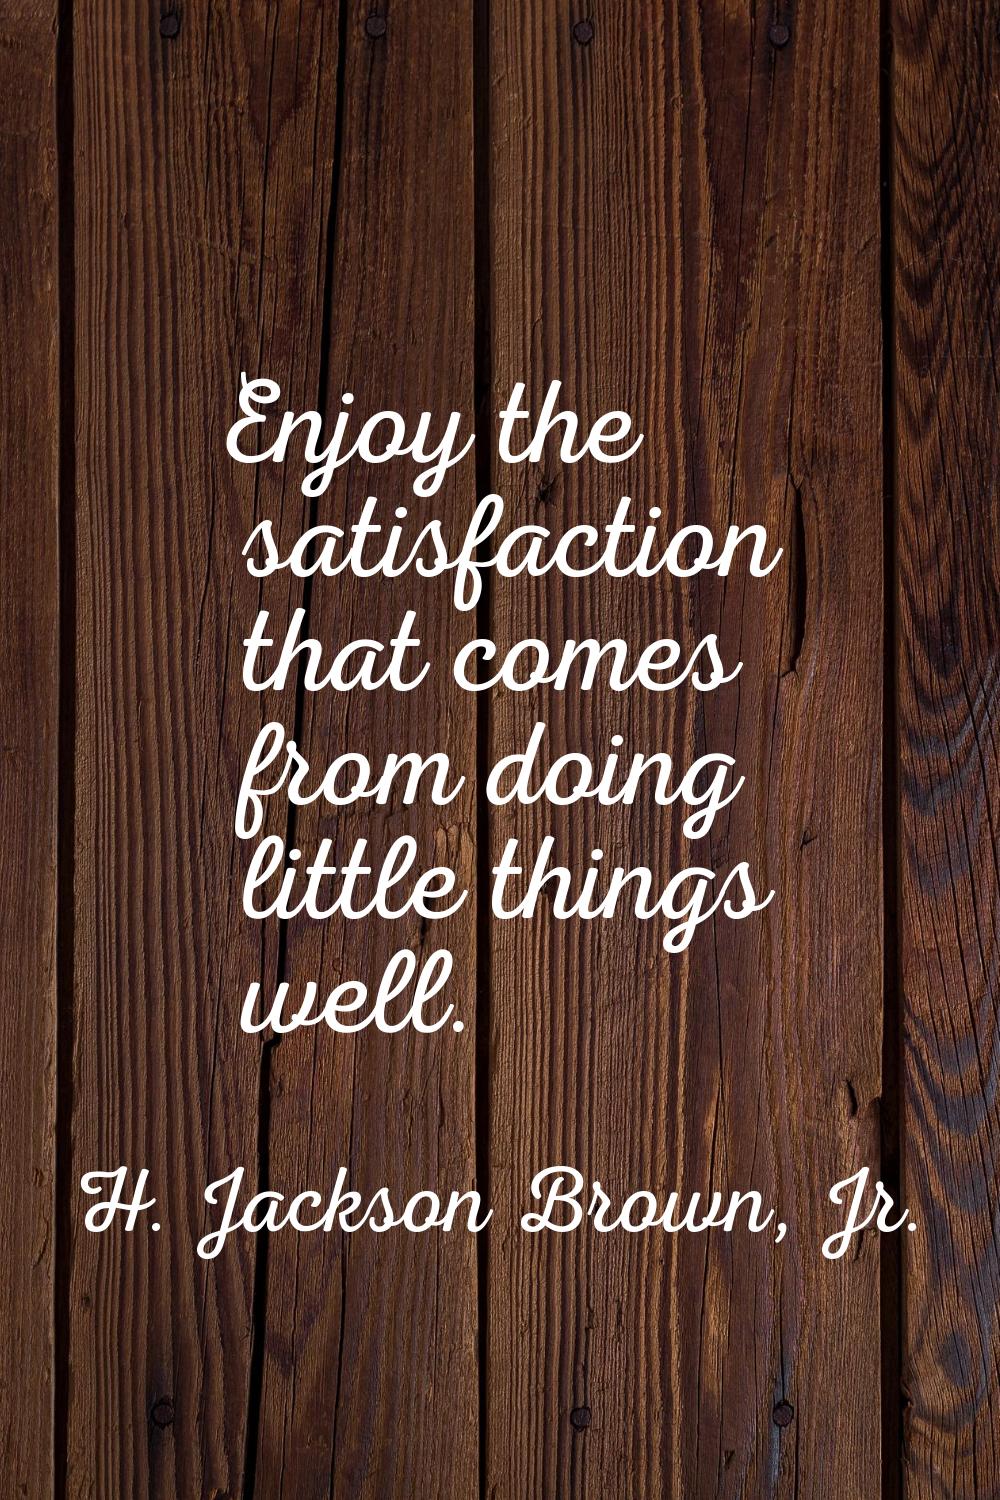 Enjoy the satisfaction that comes from doing little things well.